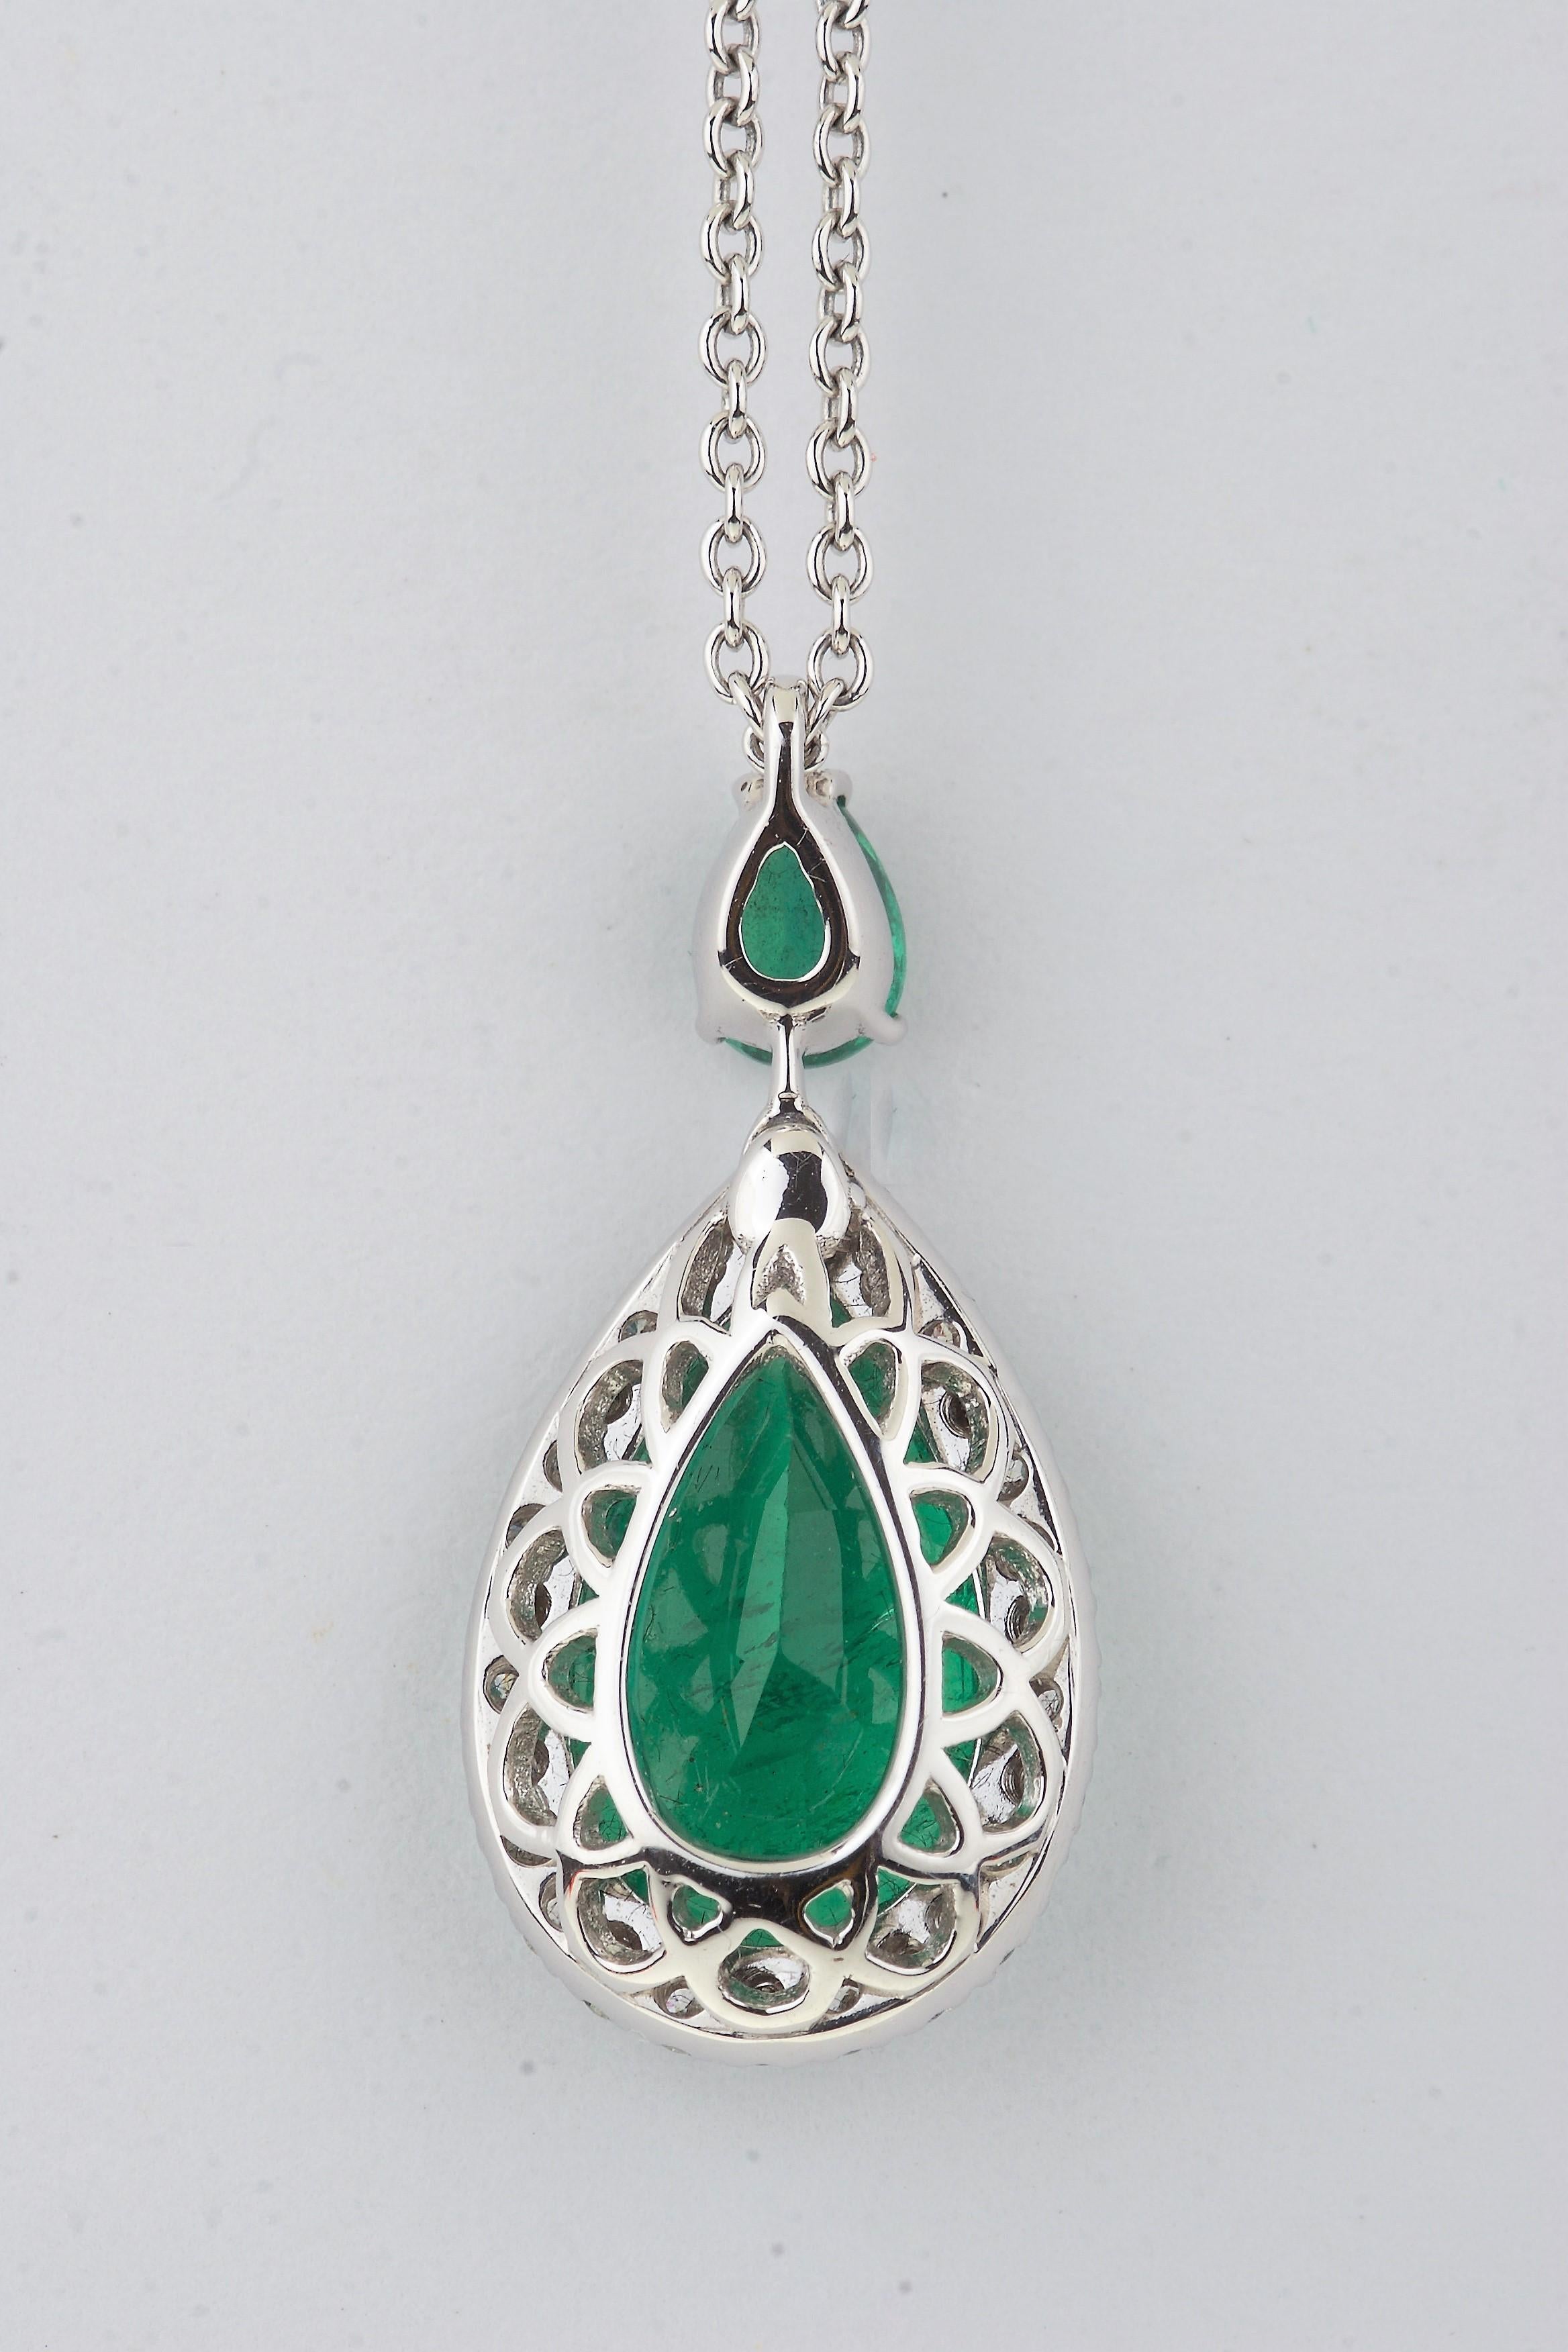 Pendant with a Certified Drop Emerald, Diamonds and Pear Cut Emerald on Top.
Delicious Cut, Proportion and Brightness for the Emerald ct. 3.68 Vivid Green Pear-Shape Mixed Cut Transparent Origin of the Stone from Zambia.
Diamonds around the Emerald